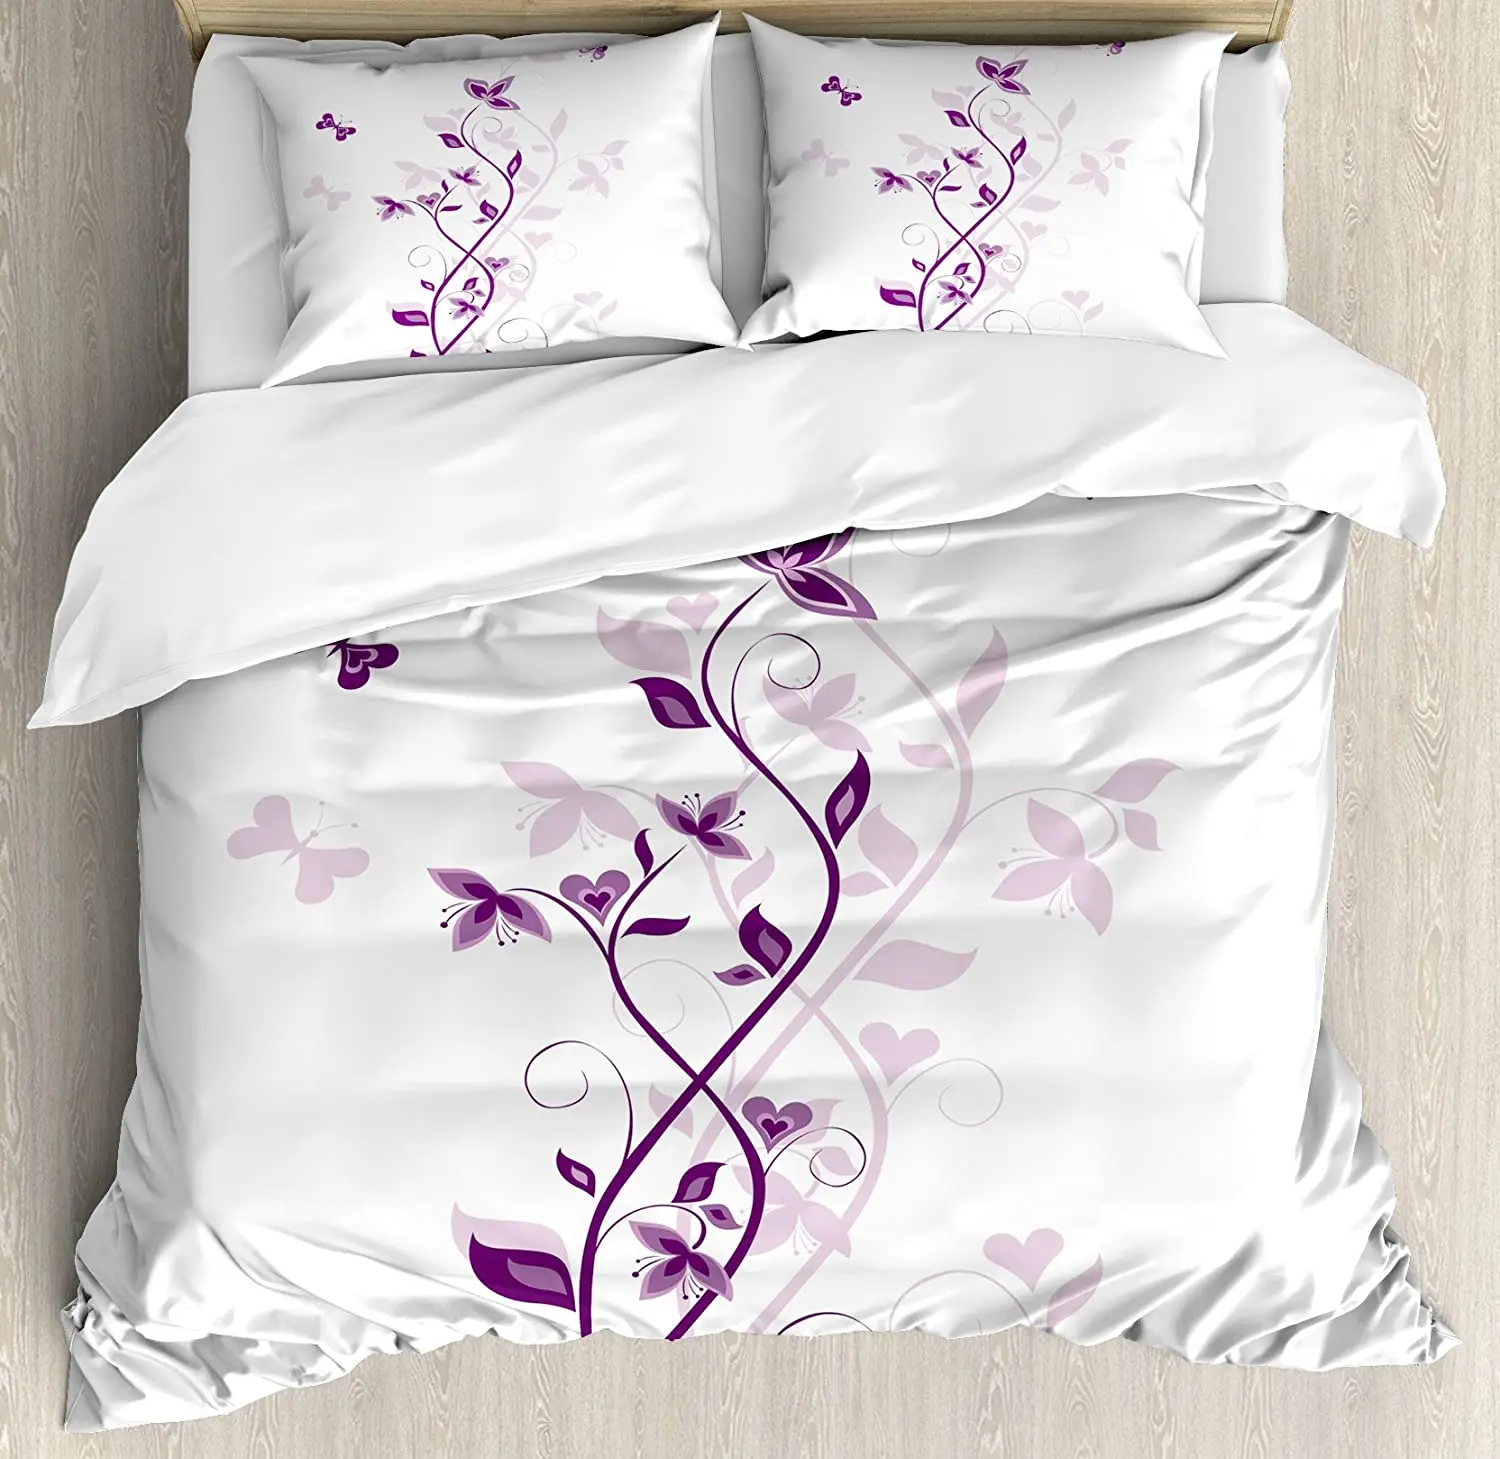 

Purple Bedding Set For Bedroom Bed Home Violet Tree Swirling Persian Lilac Blooms with Bu Duvet Cover Quilt Cover And Pillowcase